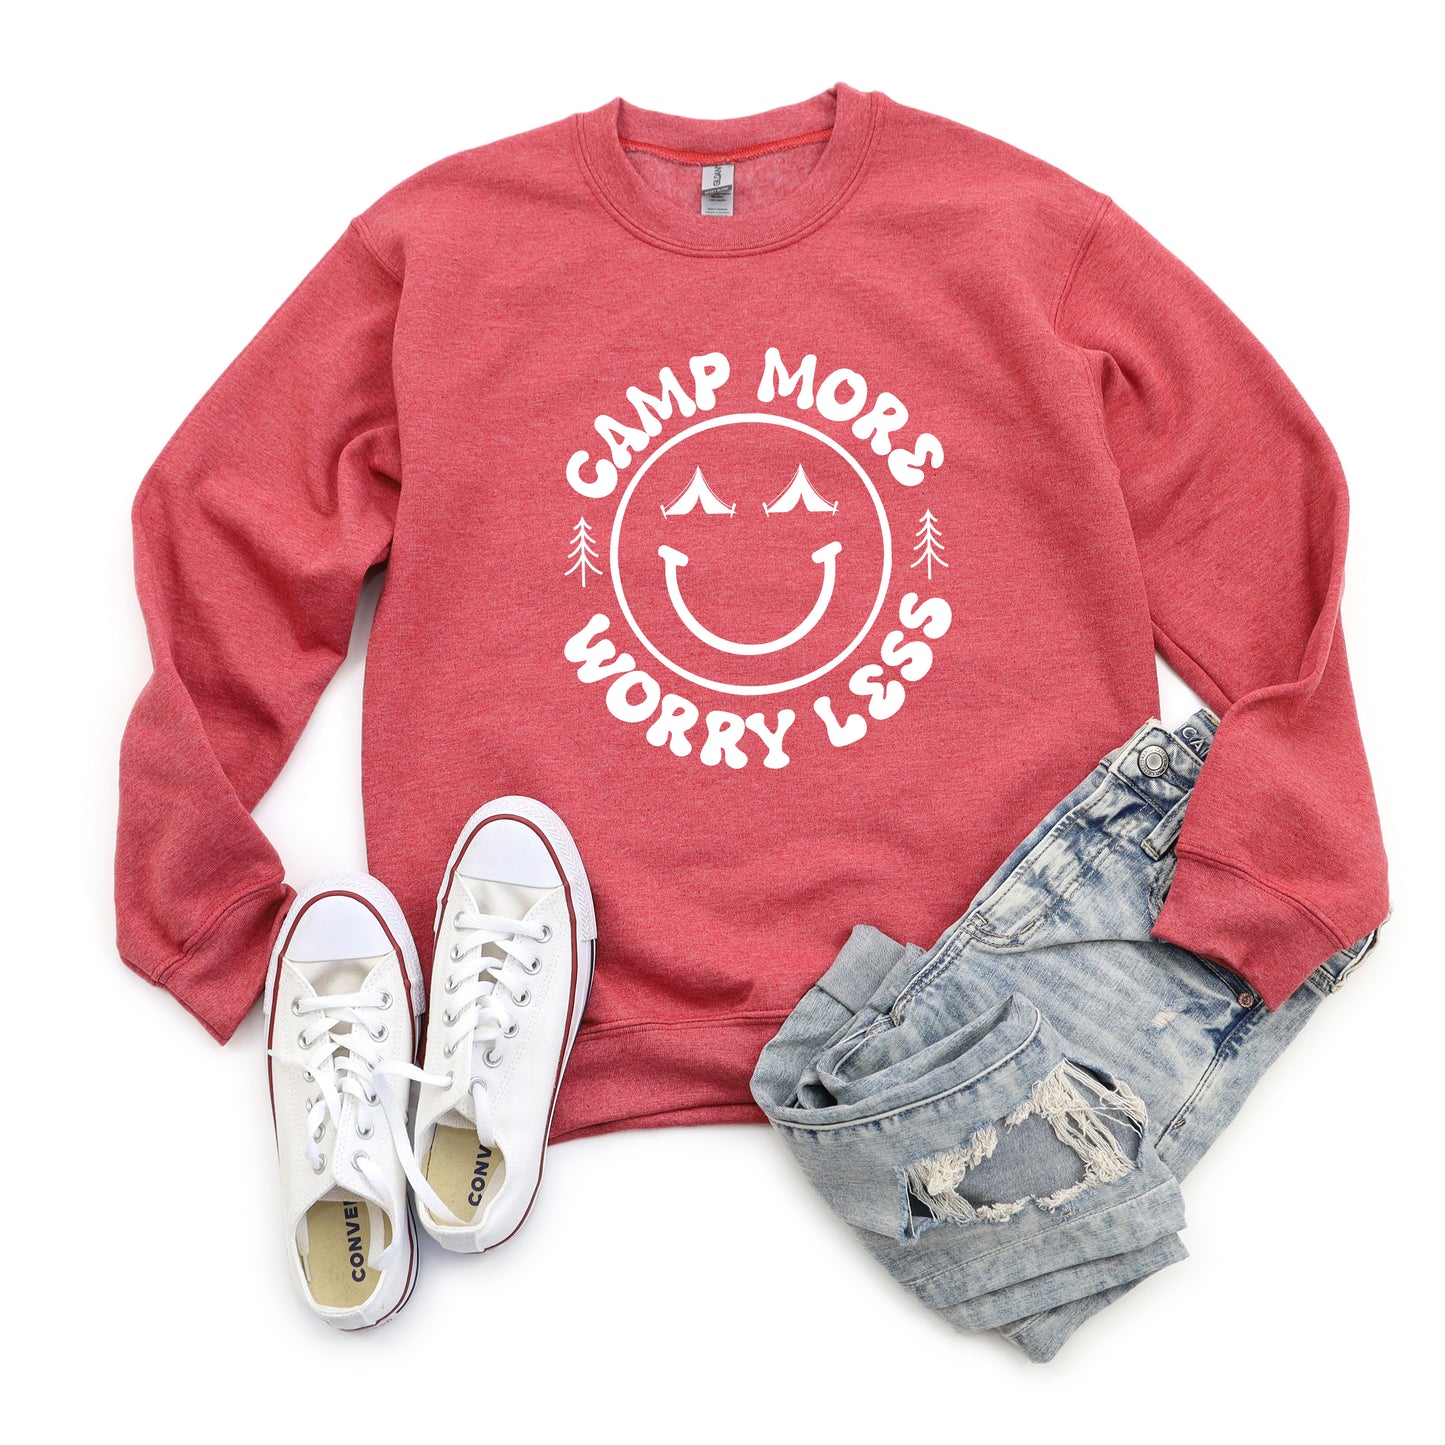 Camp More Worry Less Smiley Face | Sweatshirt